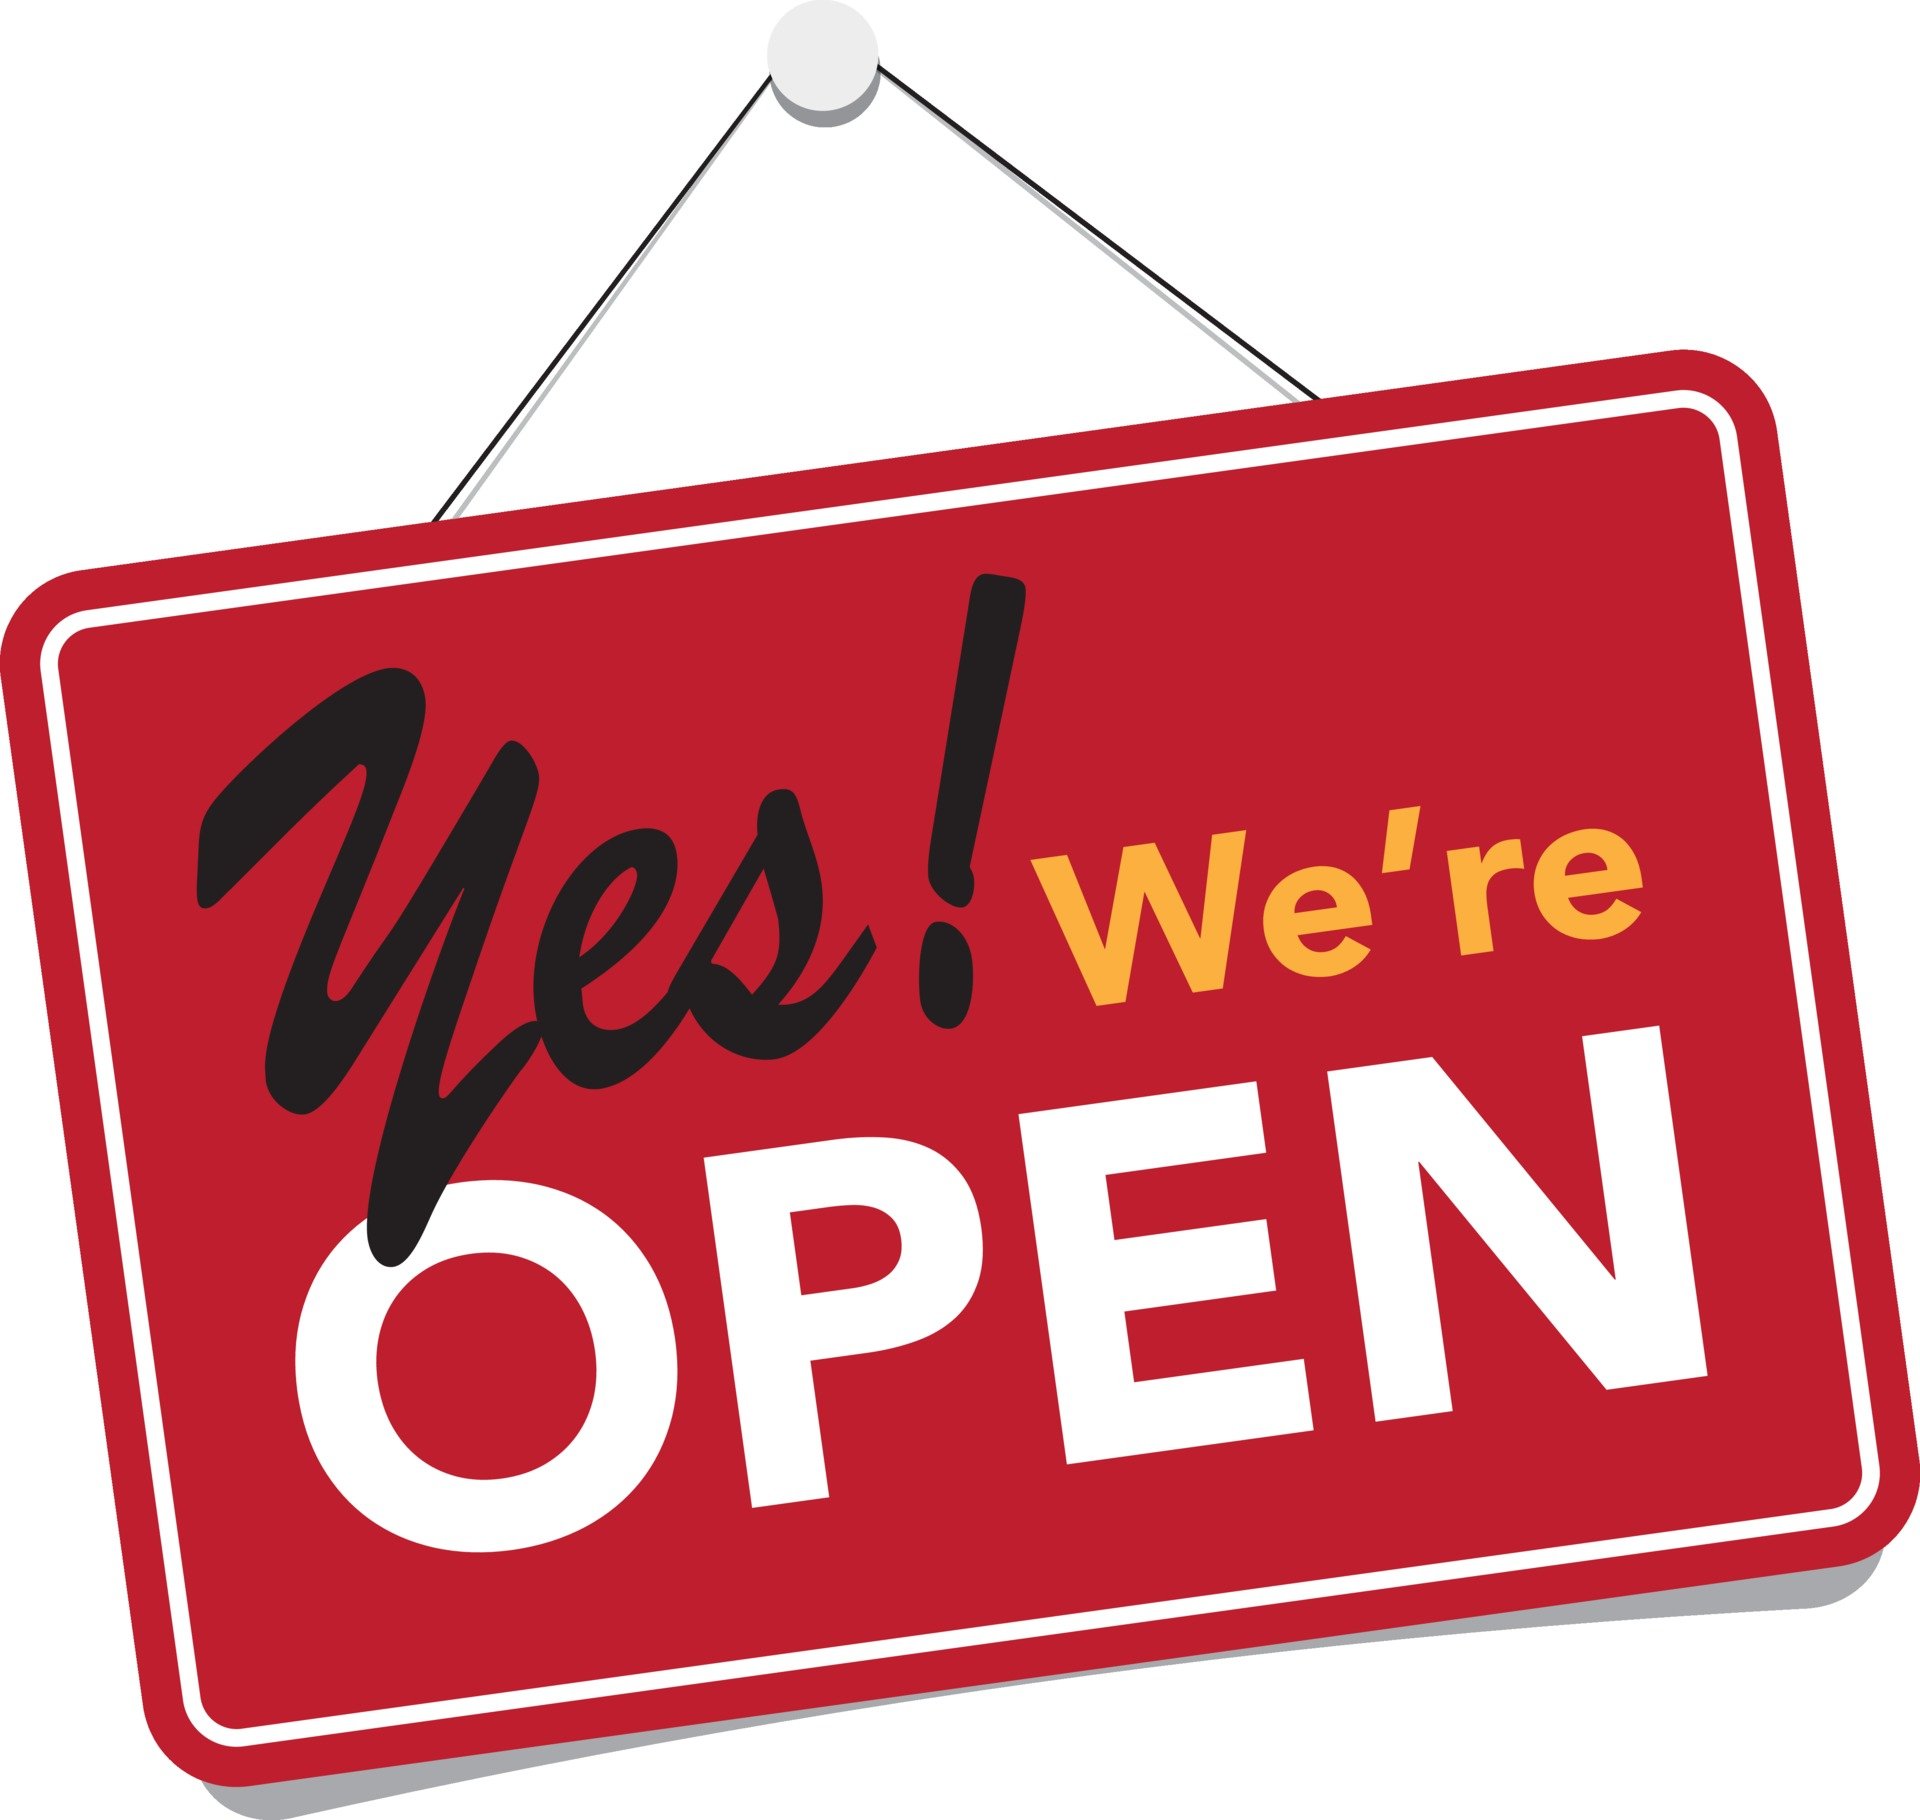 Welcome, We’re now open!